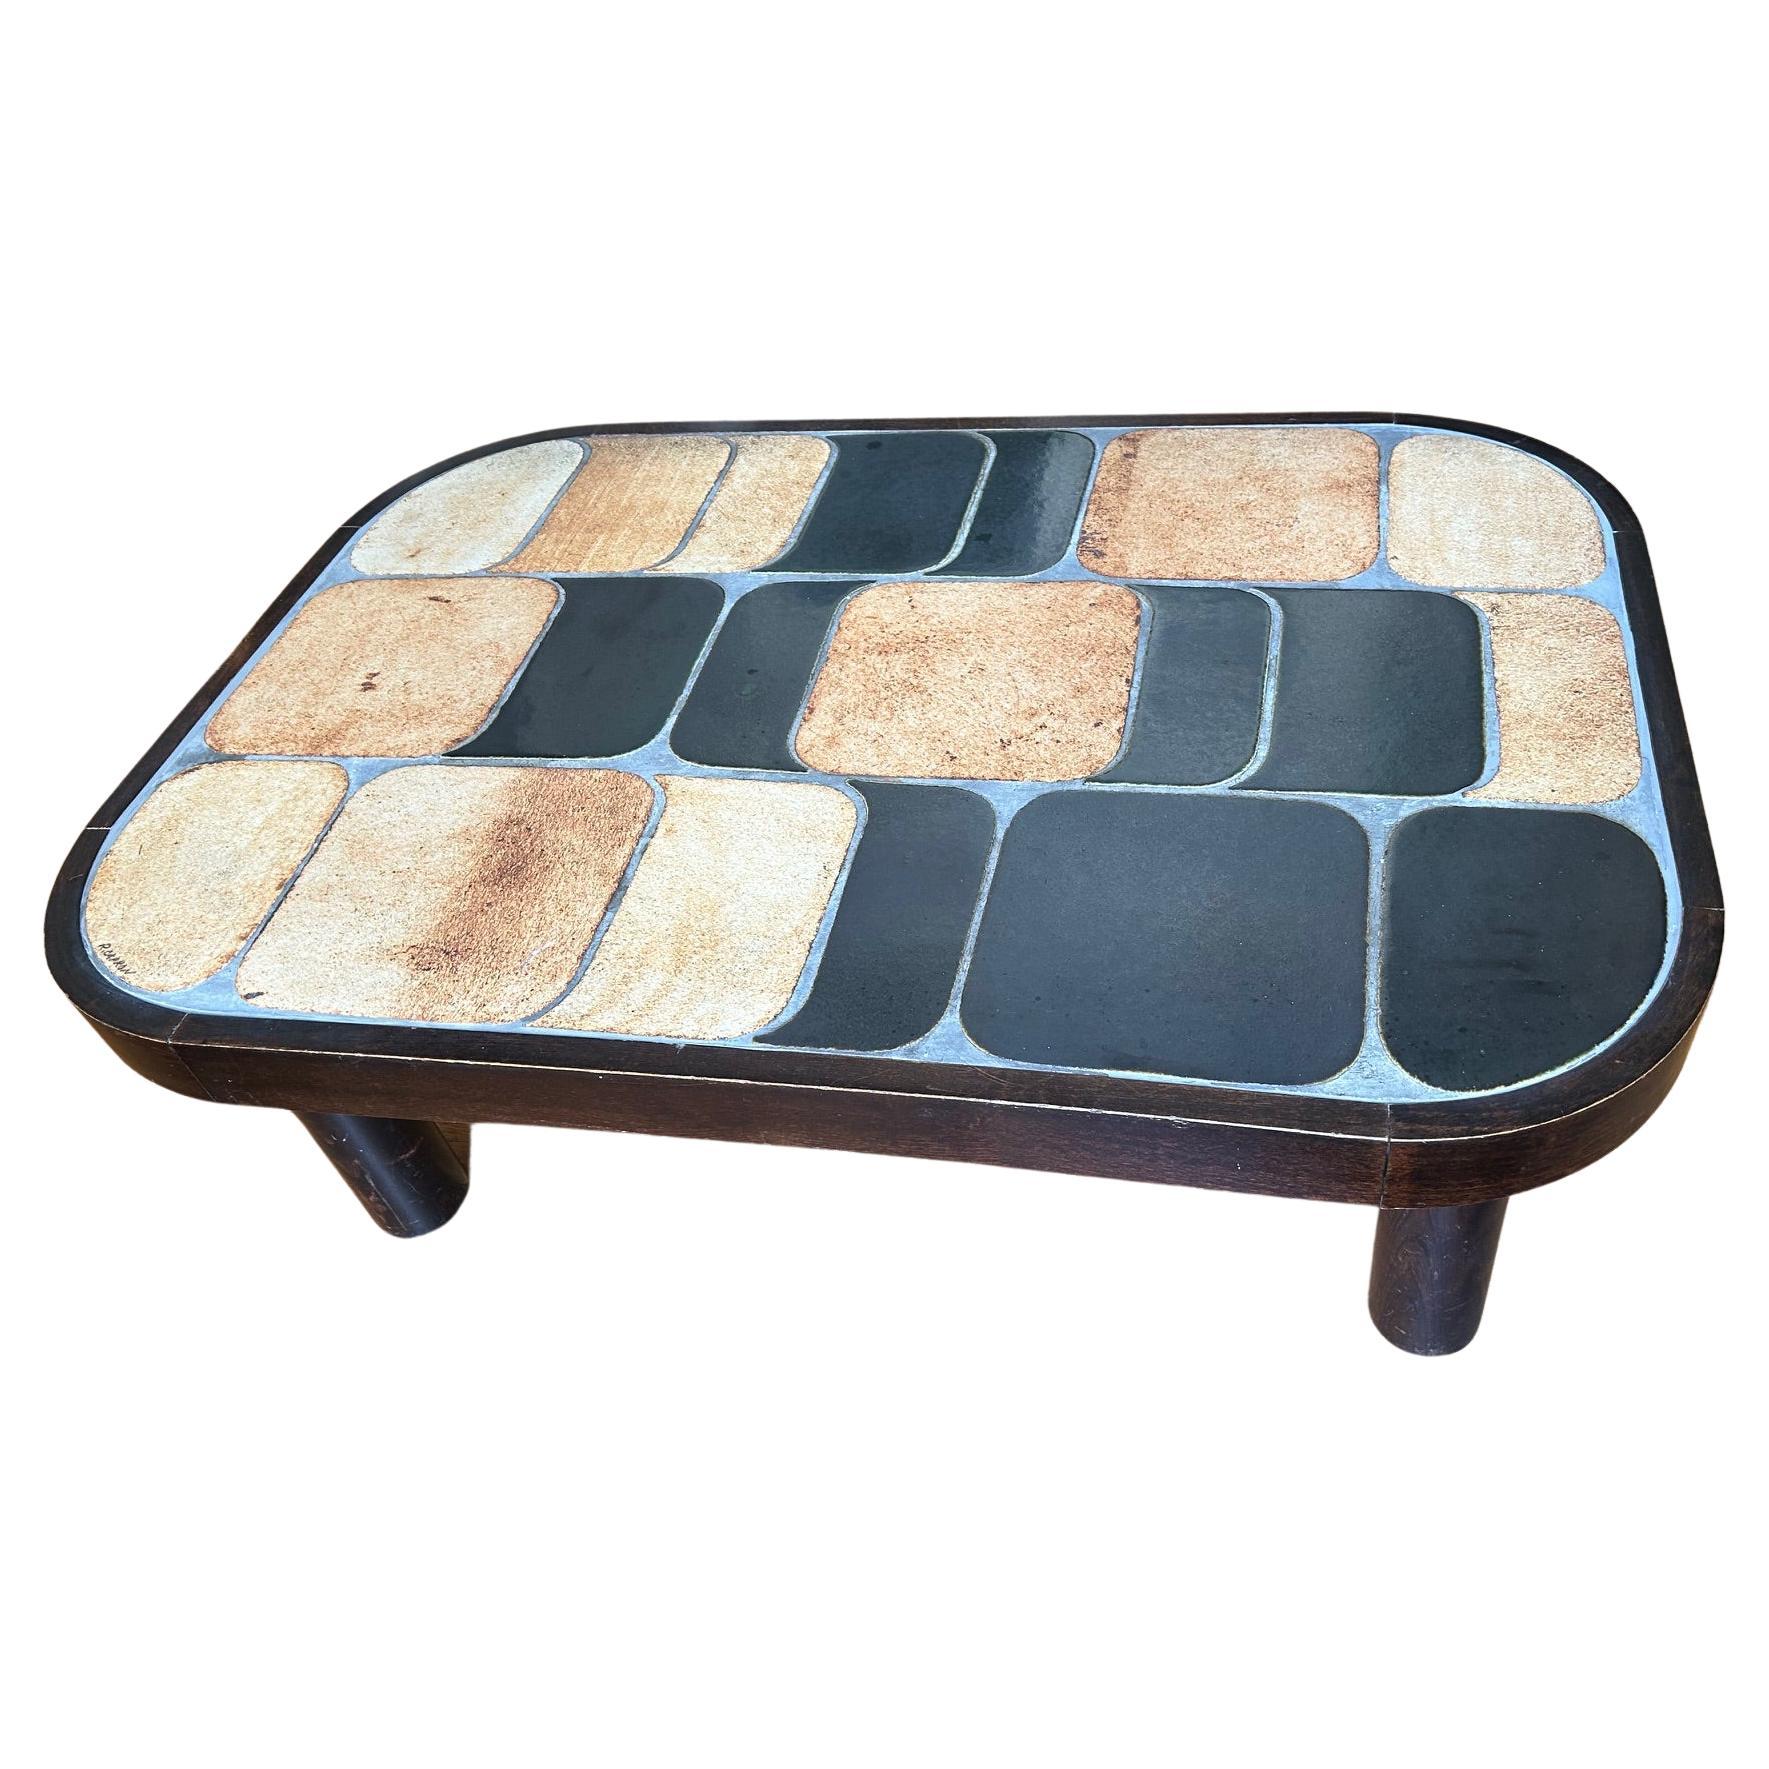 Ceramic Shogun coffee table by Roger Capron, France, 1960's